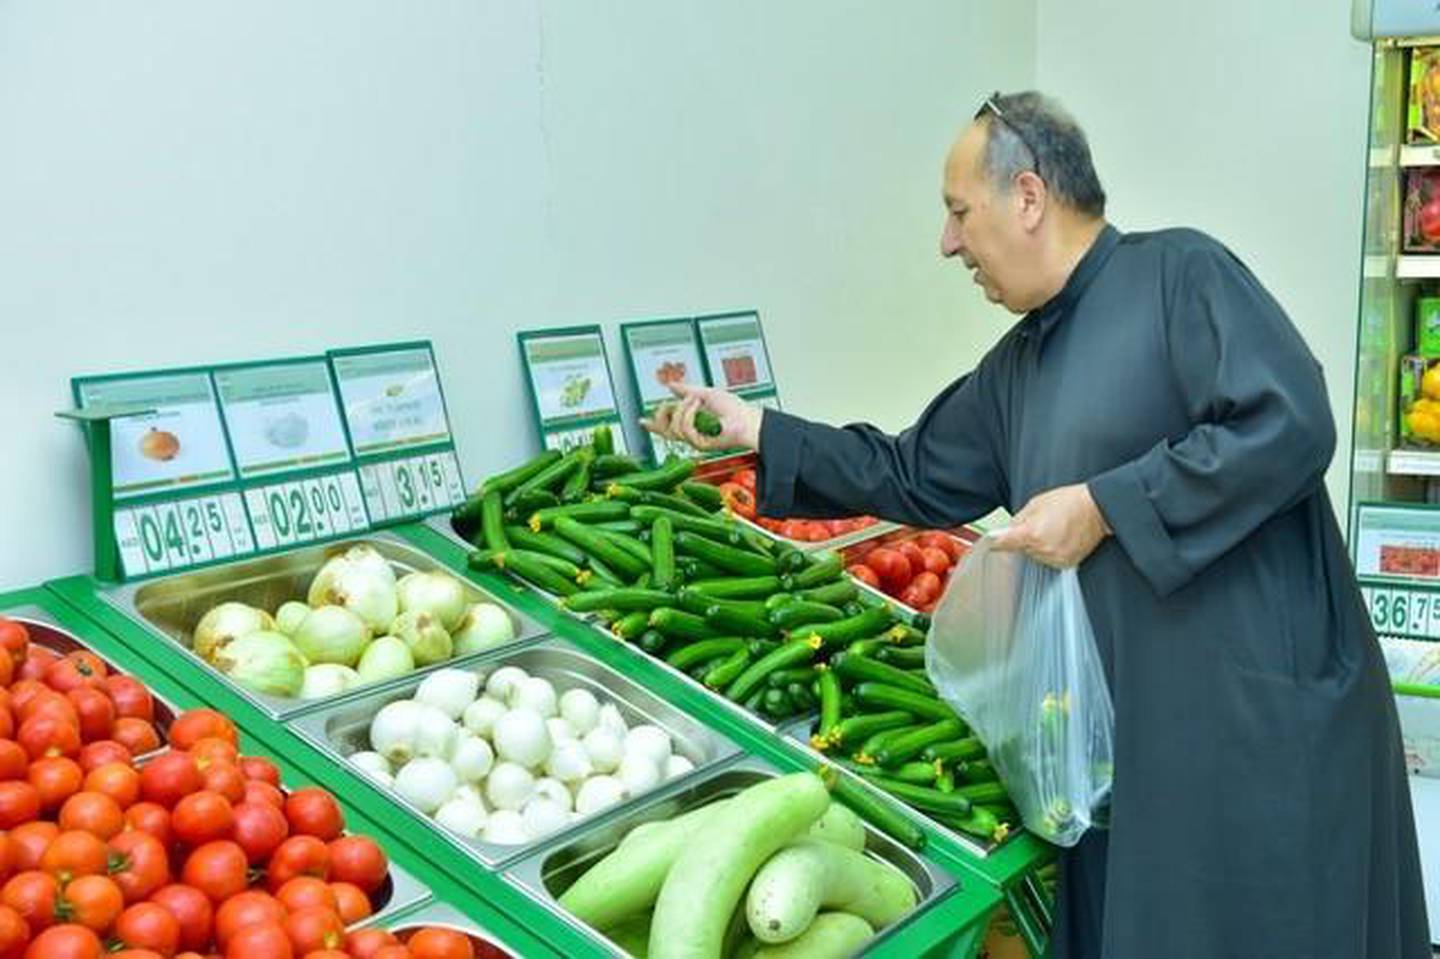 Taste of Abu Dhabi will include a try-and-buy-style farmers' market